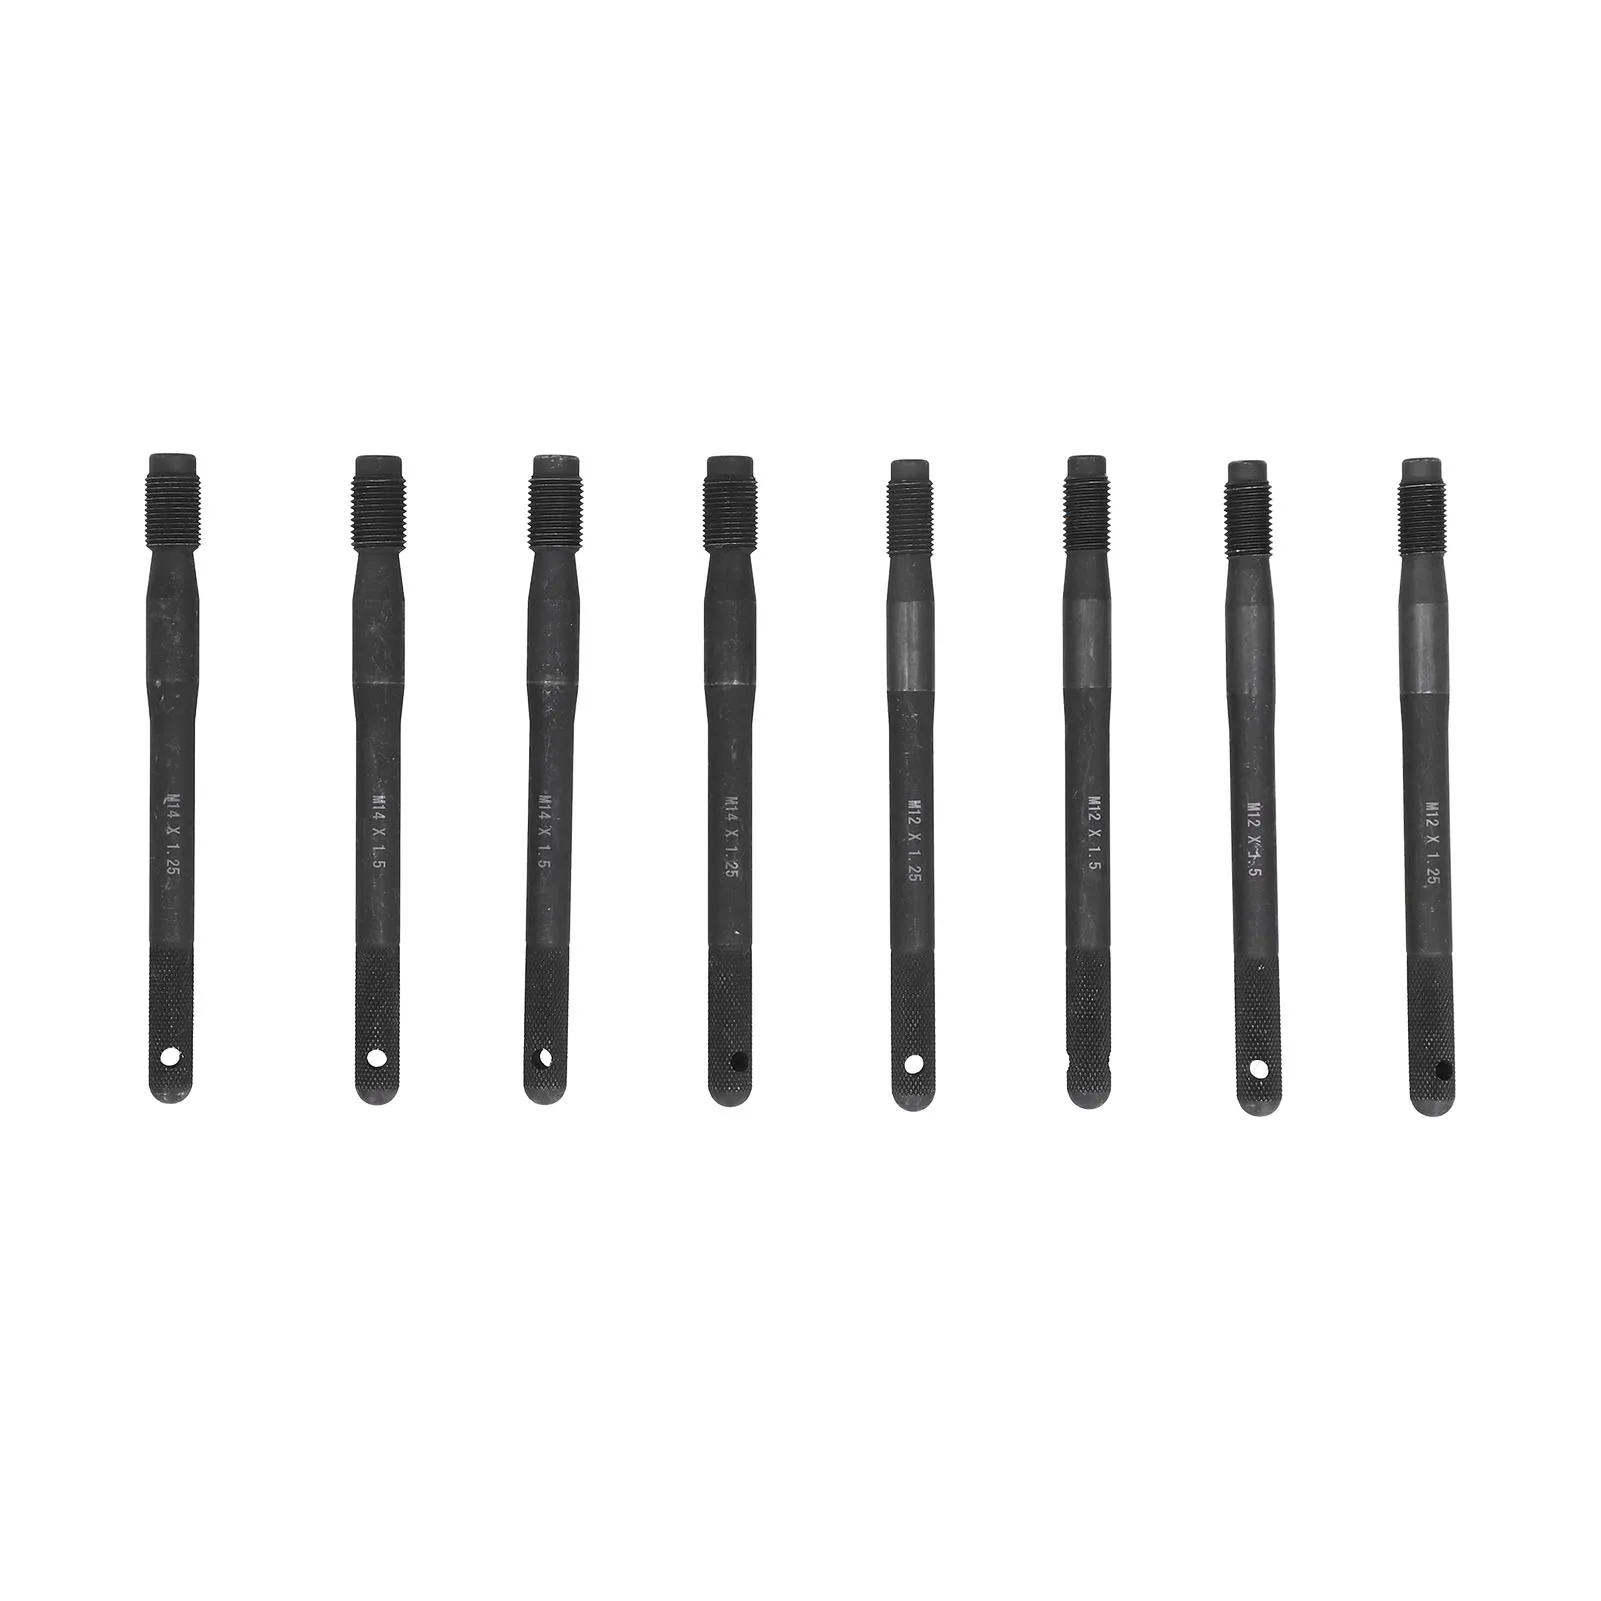 

8pcs Wheel Stud Alignment Pins Mounting Guide Replacement for BENZ M133 152 270 274 276 278 Engine